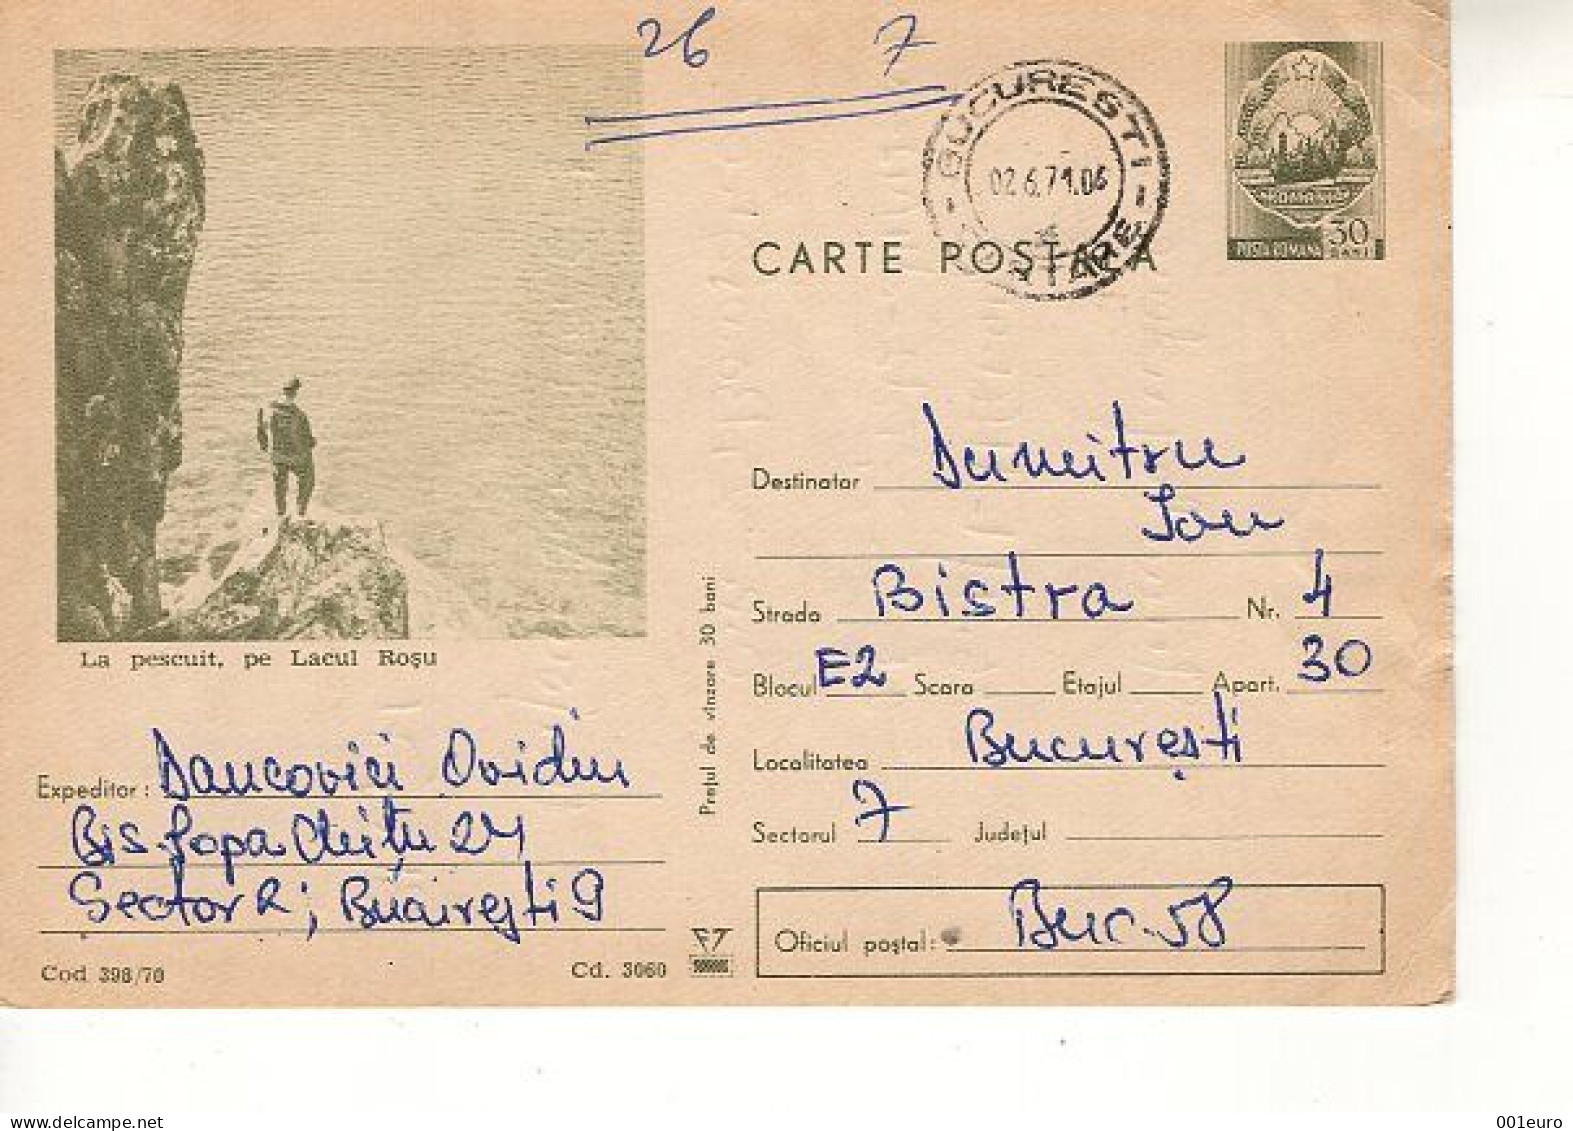 ROMANIA 398x1970: ANGLER - MOUNTAIN LAKE, Used Prepaid Postal Stationery Card - Registered Shipping! - Ganzsachen